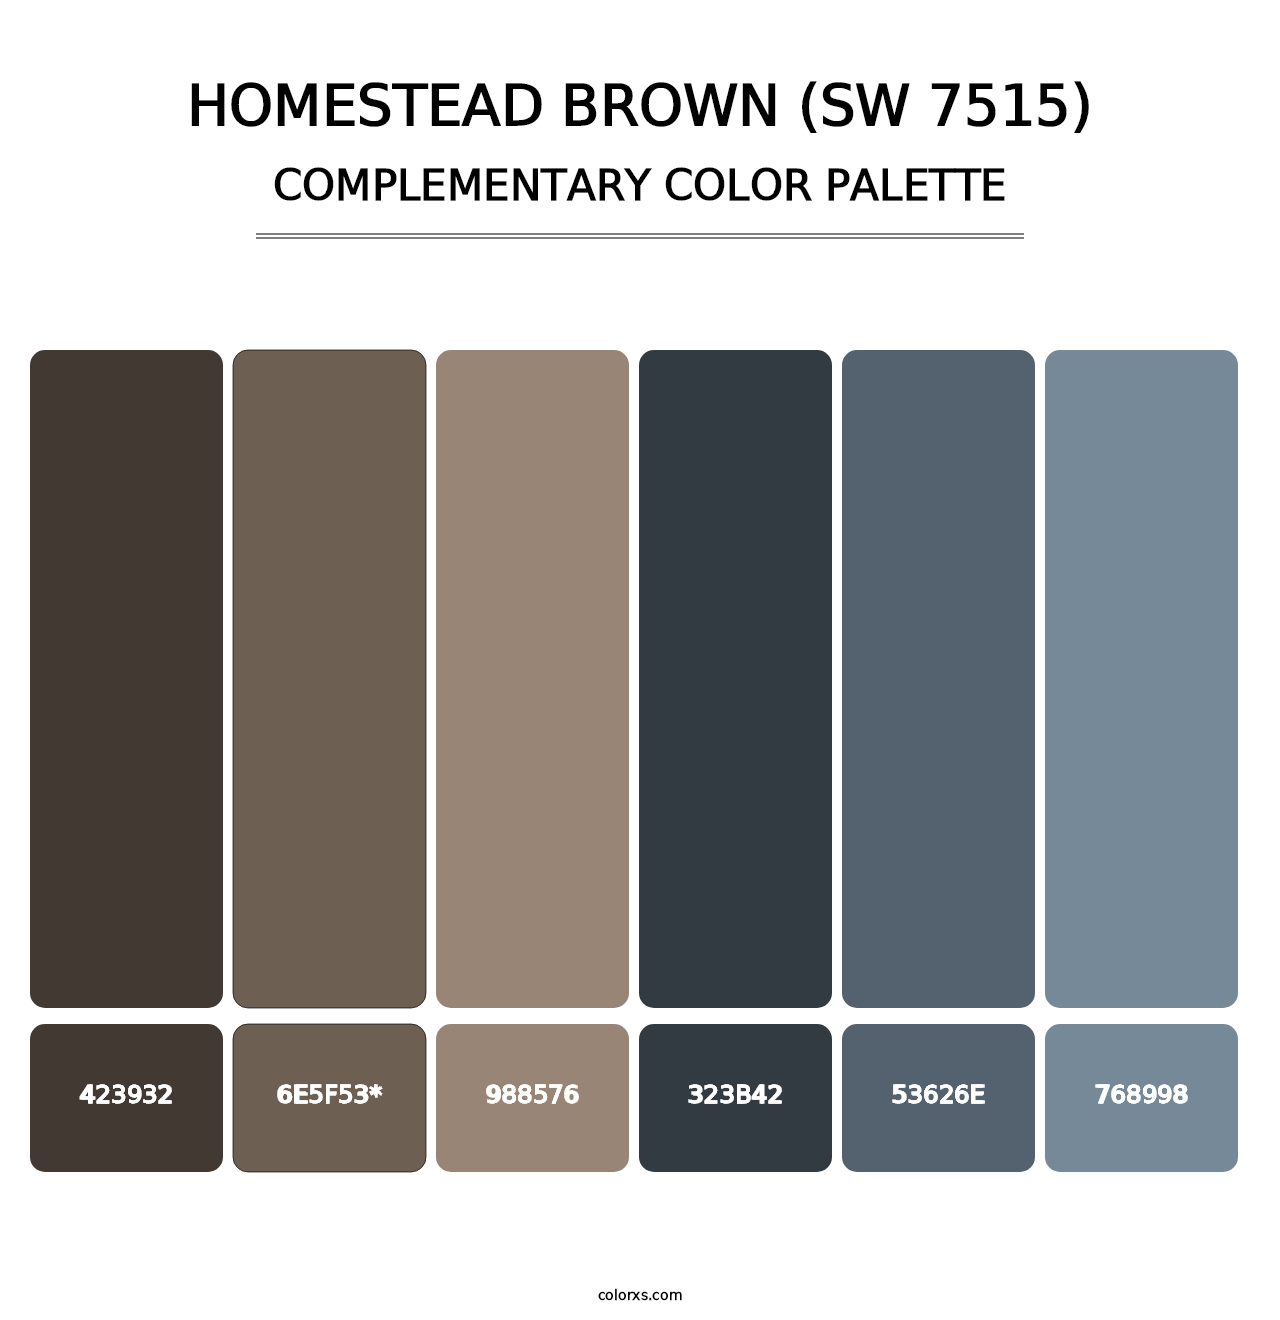 Homestead Brown (SW 7515) - Complementary Color Palette